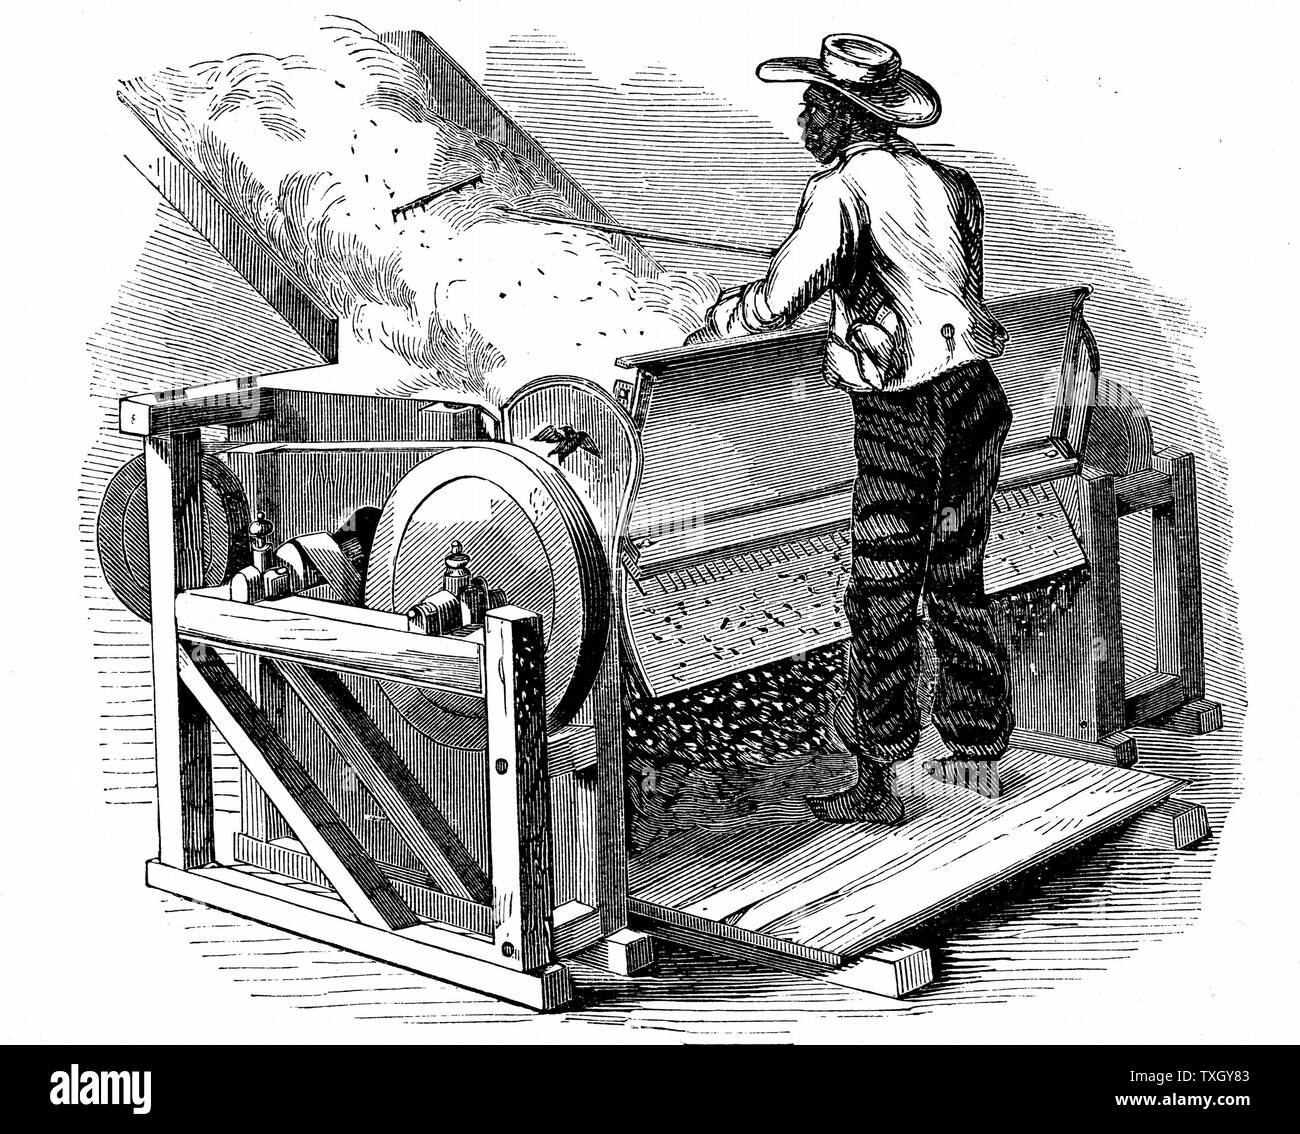 Saw gin for cleaning cotton being operated by barefoot black labourer Southern States of USA Eagle gin, improved form of Whitney gin 1865 Wood engraving Stock Photo